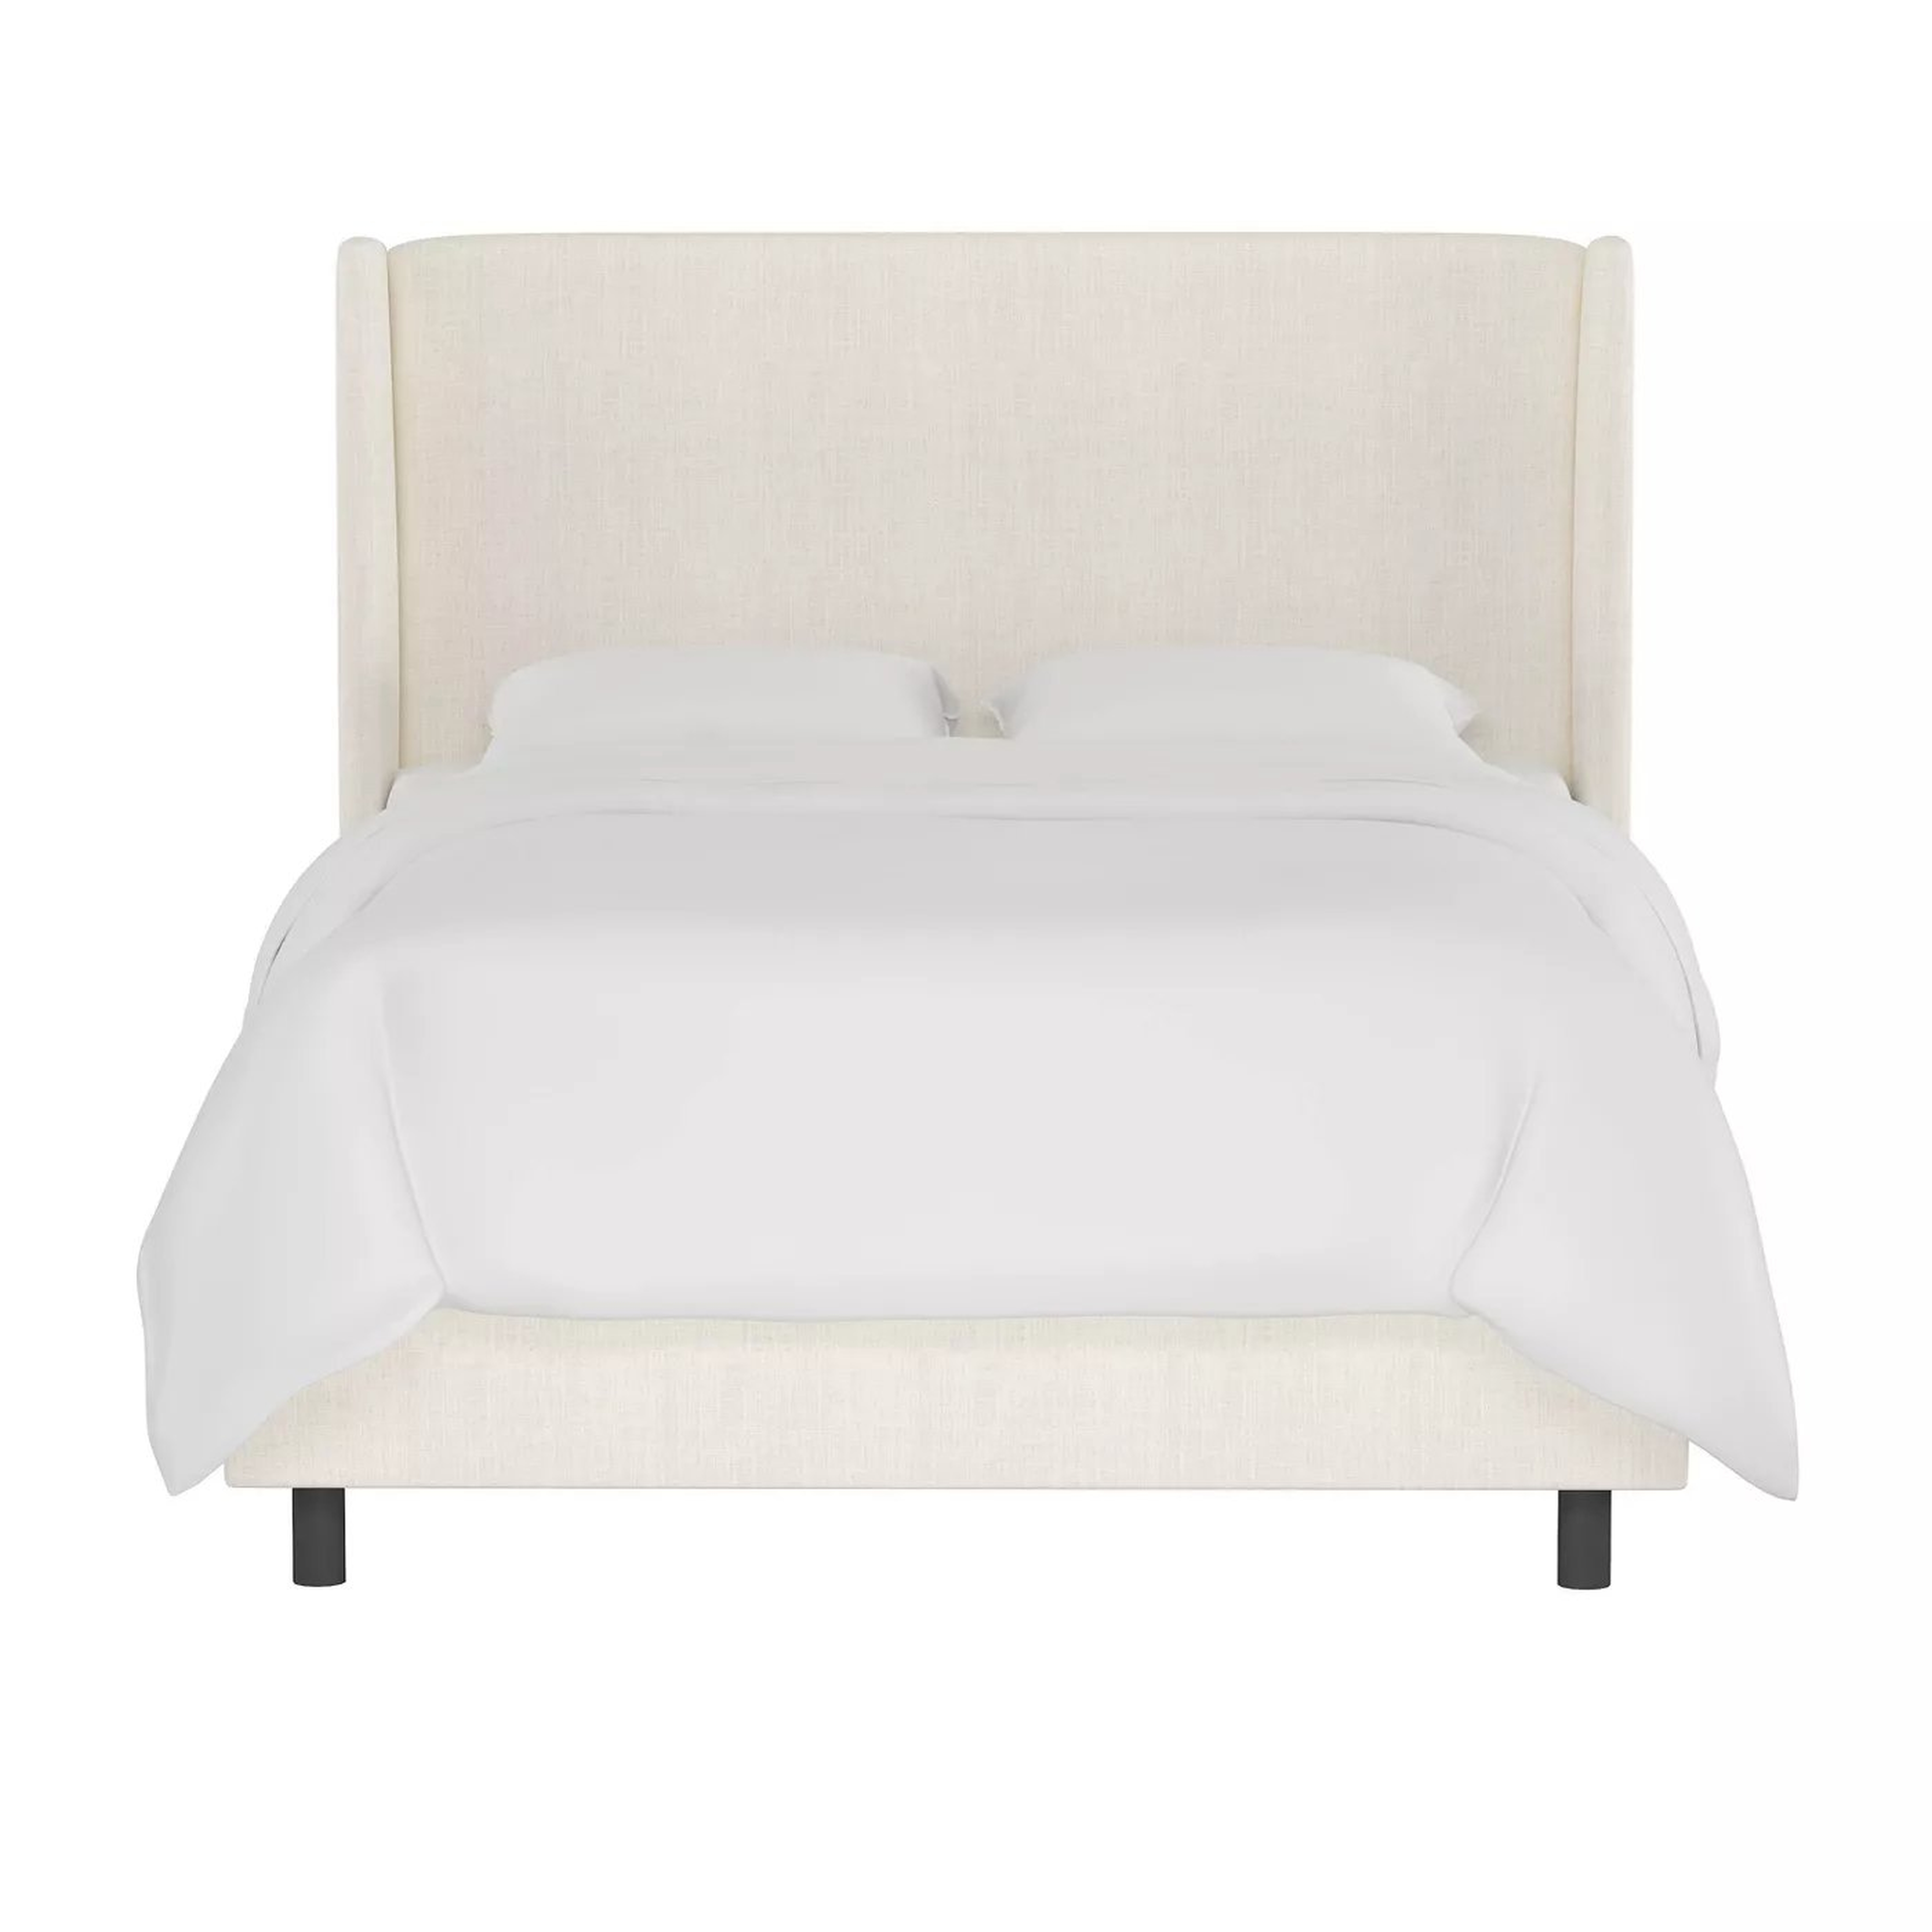 Amera Upholstered Low Profile Standard Bed Queen size - Wayfair